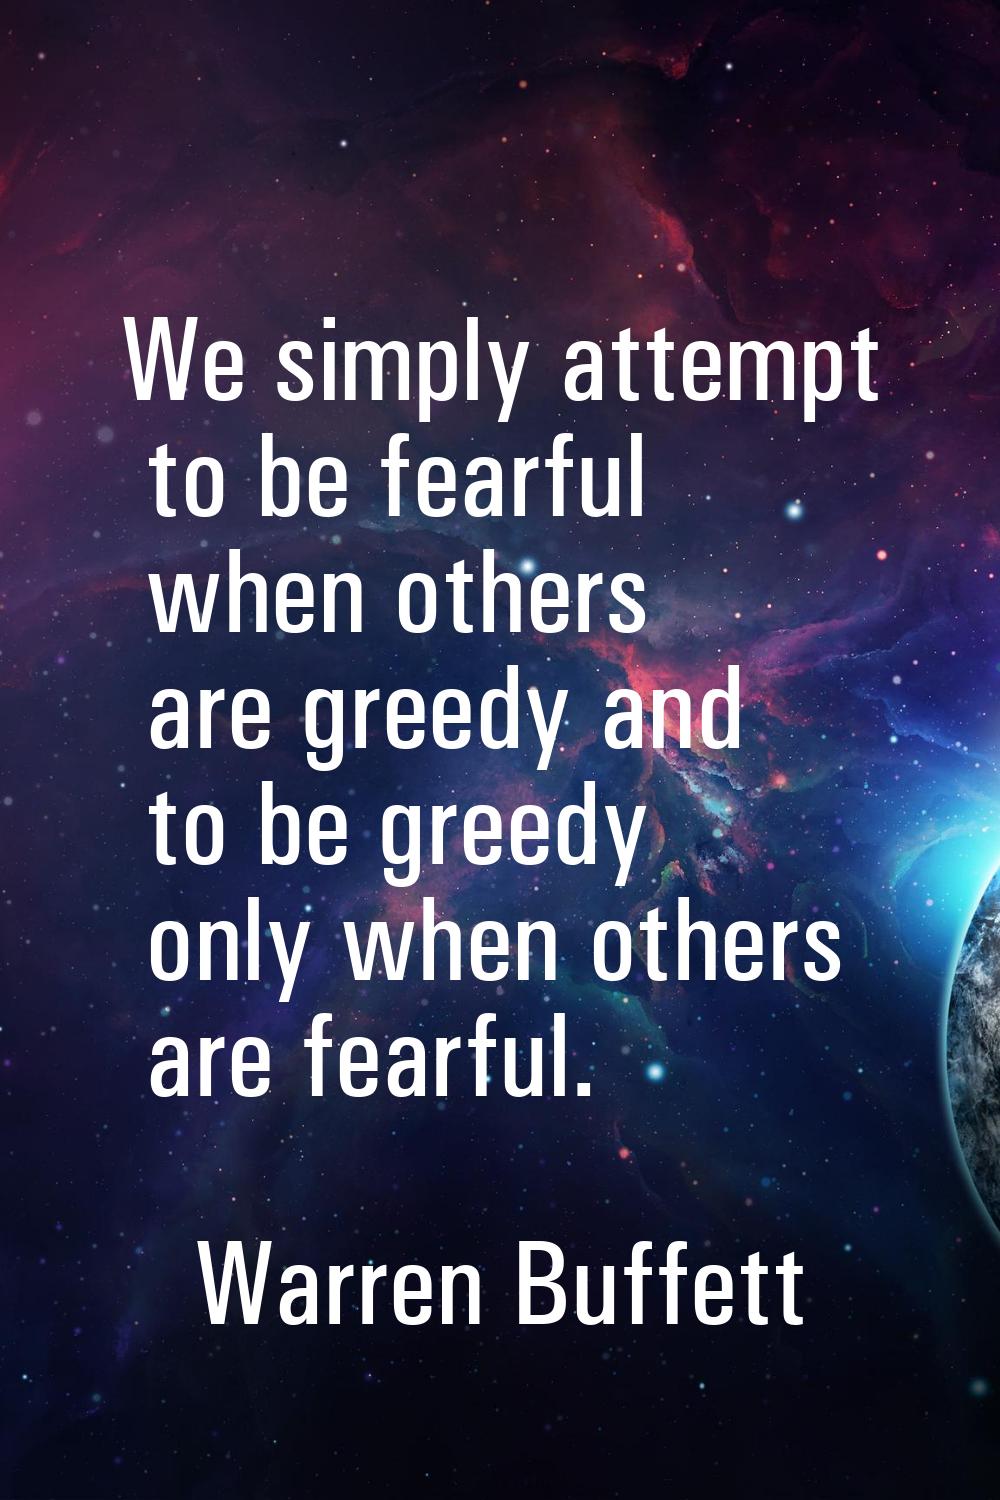 We simply attempt to be fearful when others are greedy and to be greedy only when others are fearfu